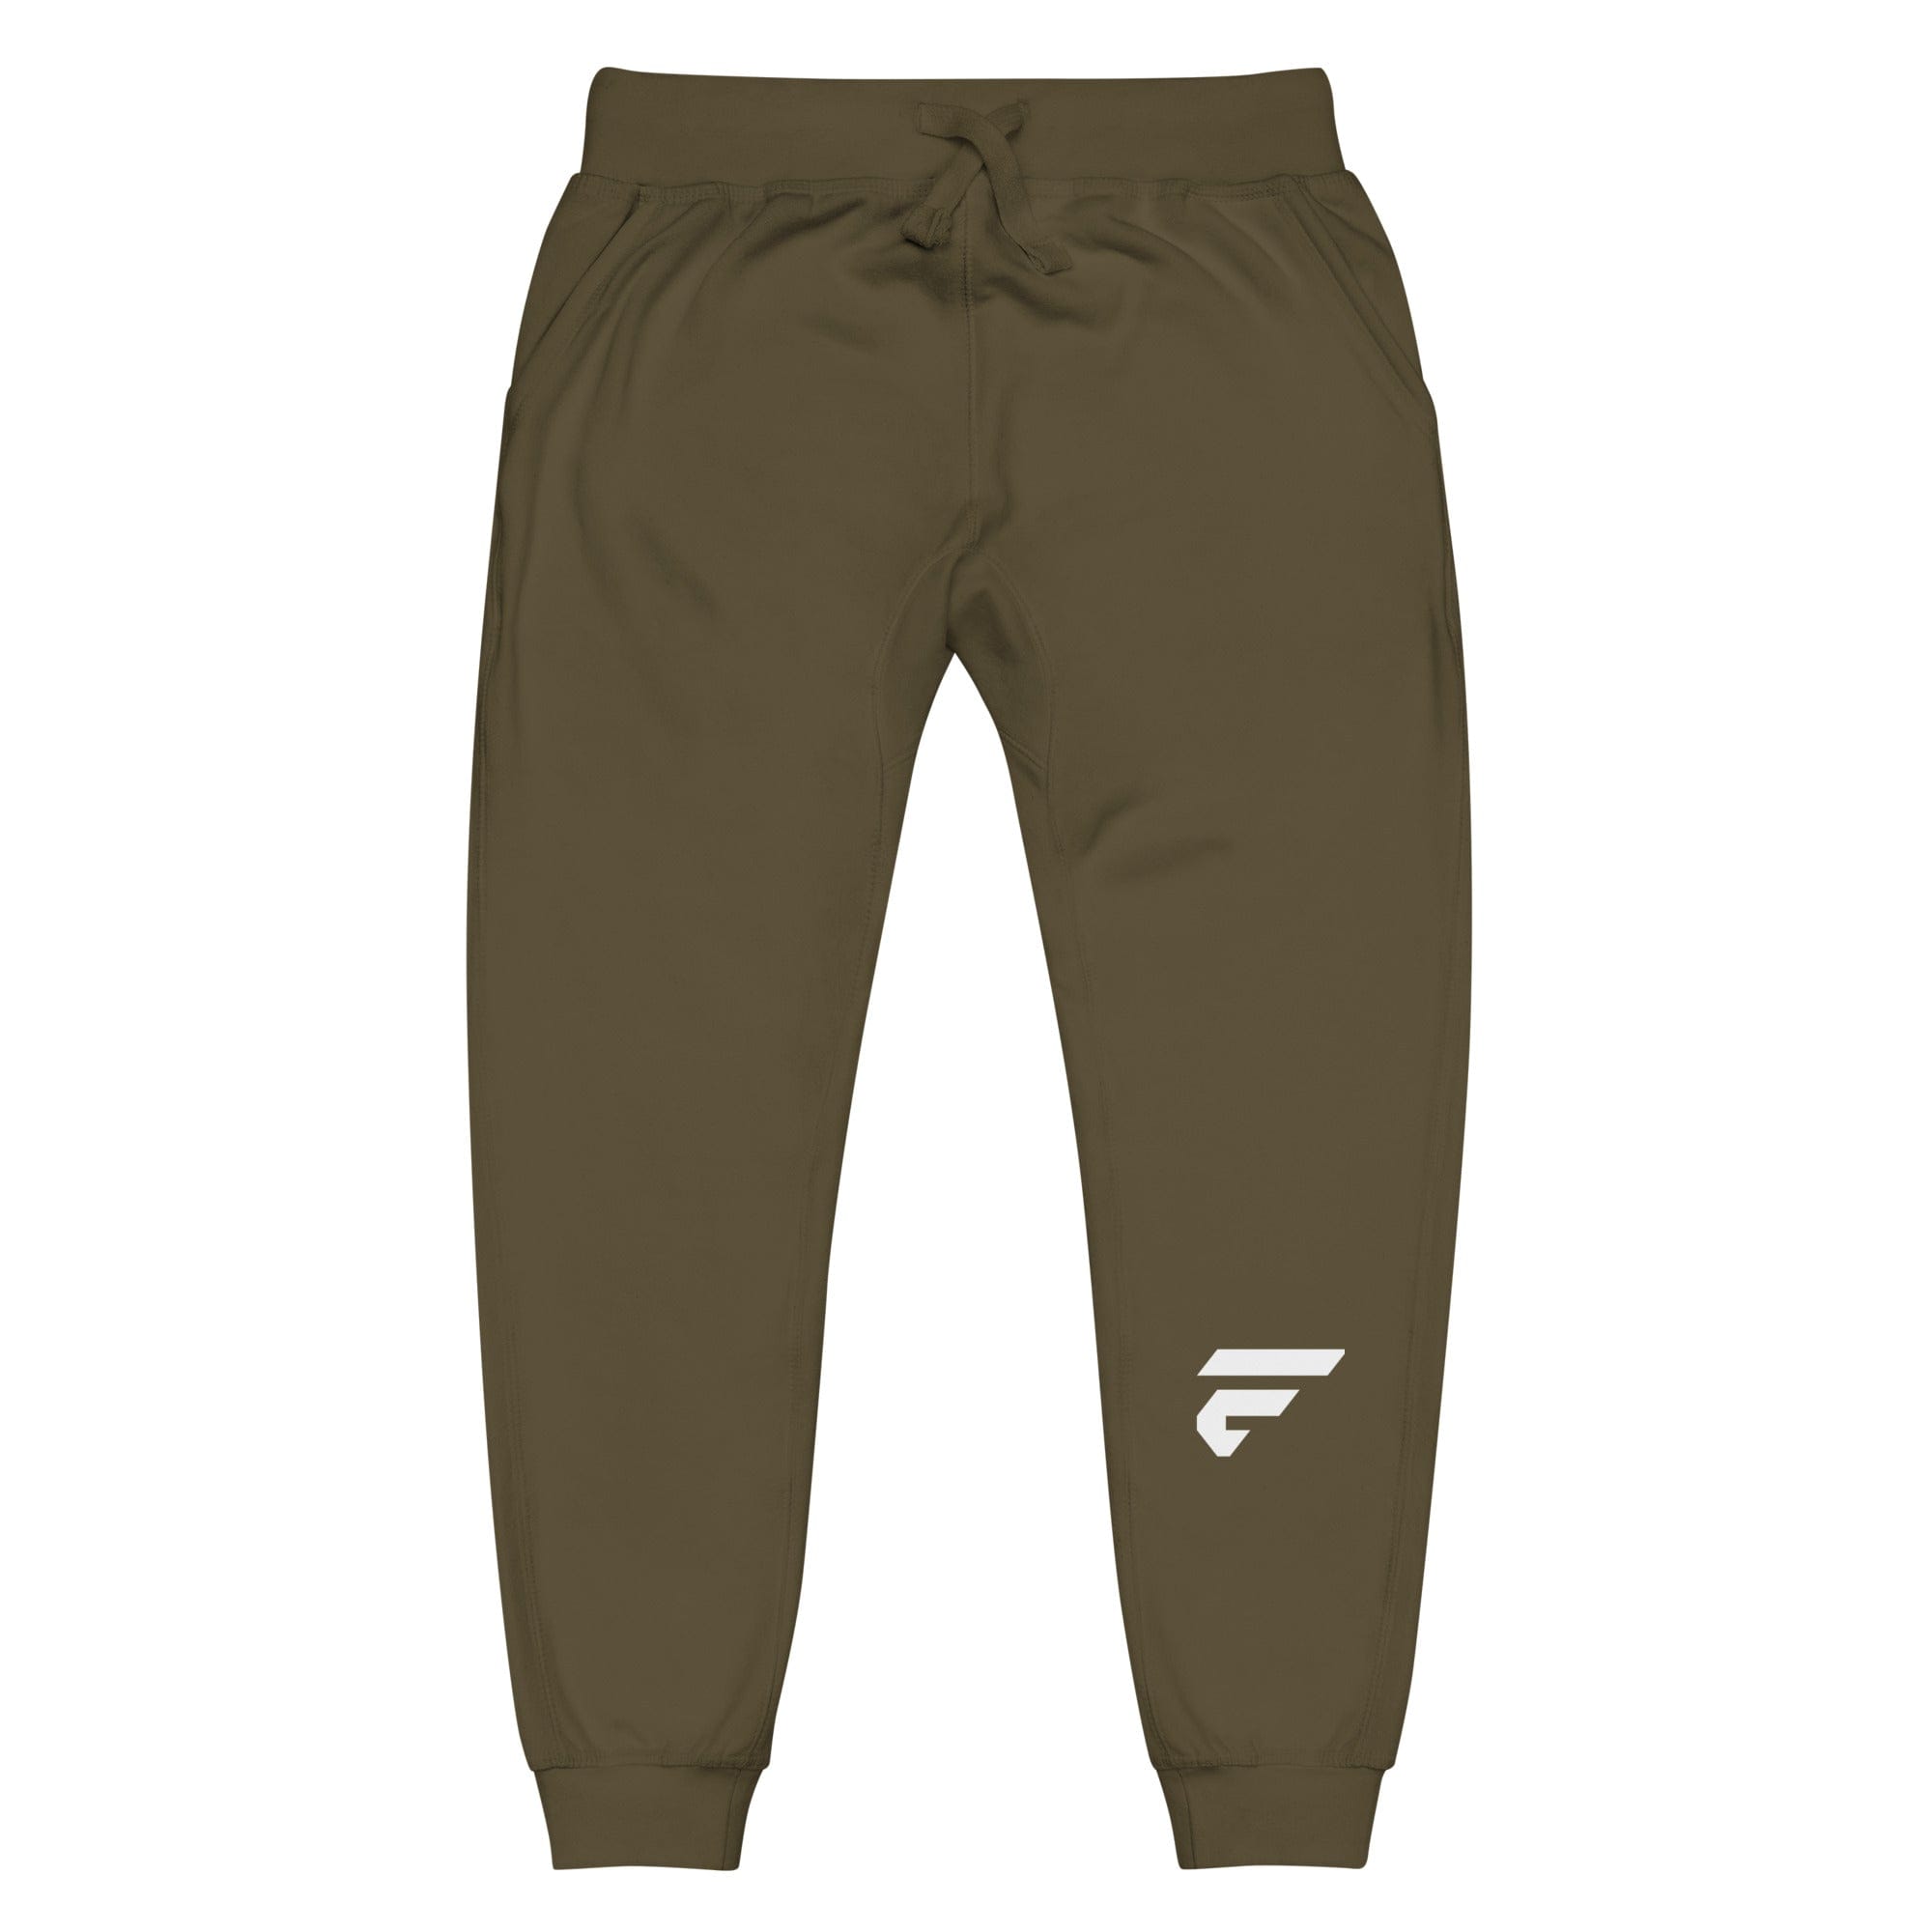 Forest green unisex joggers with Fire Cornhole F logo in white